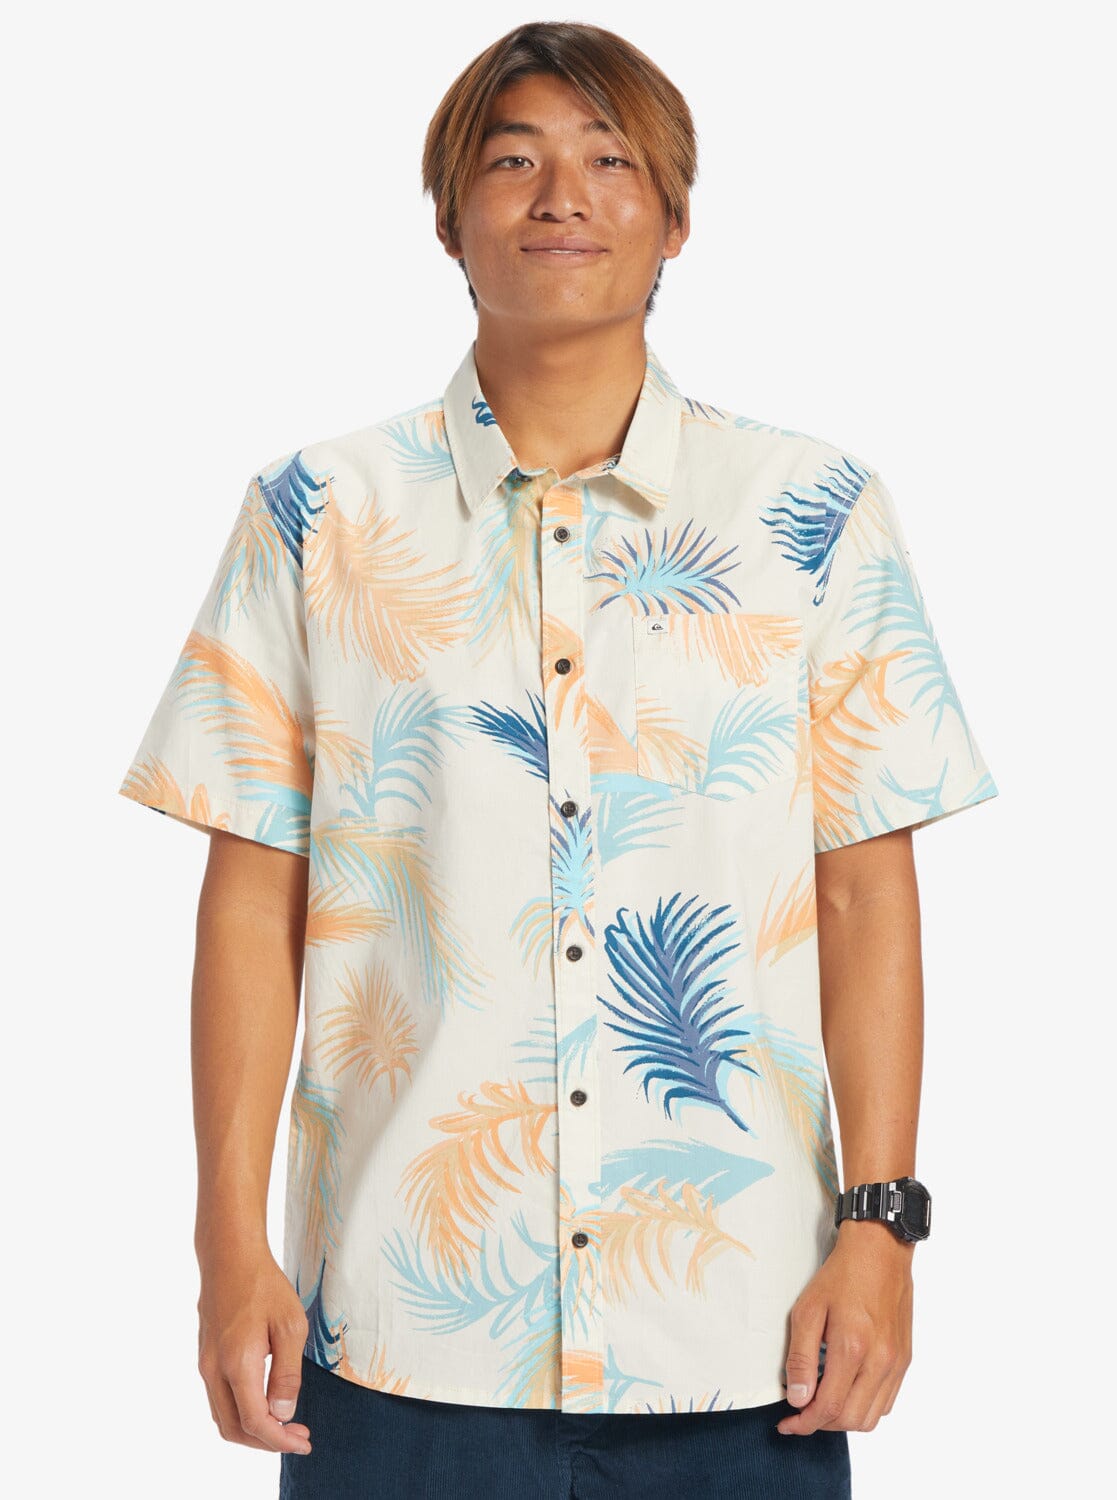 Quiksilver Tropical Glitch Short Sleeve Shirt Apparel & Accessories > Clothing QUIKSILVER MENS 